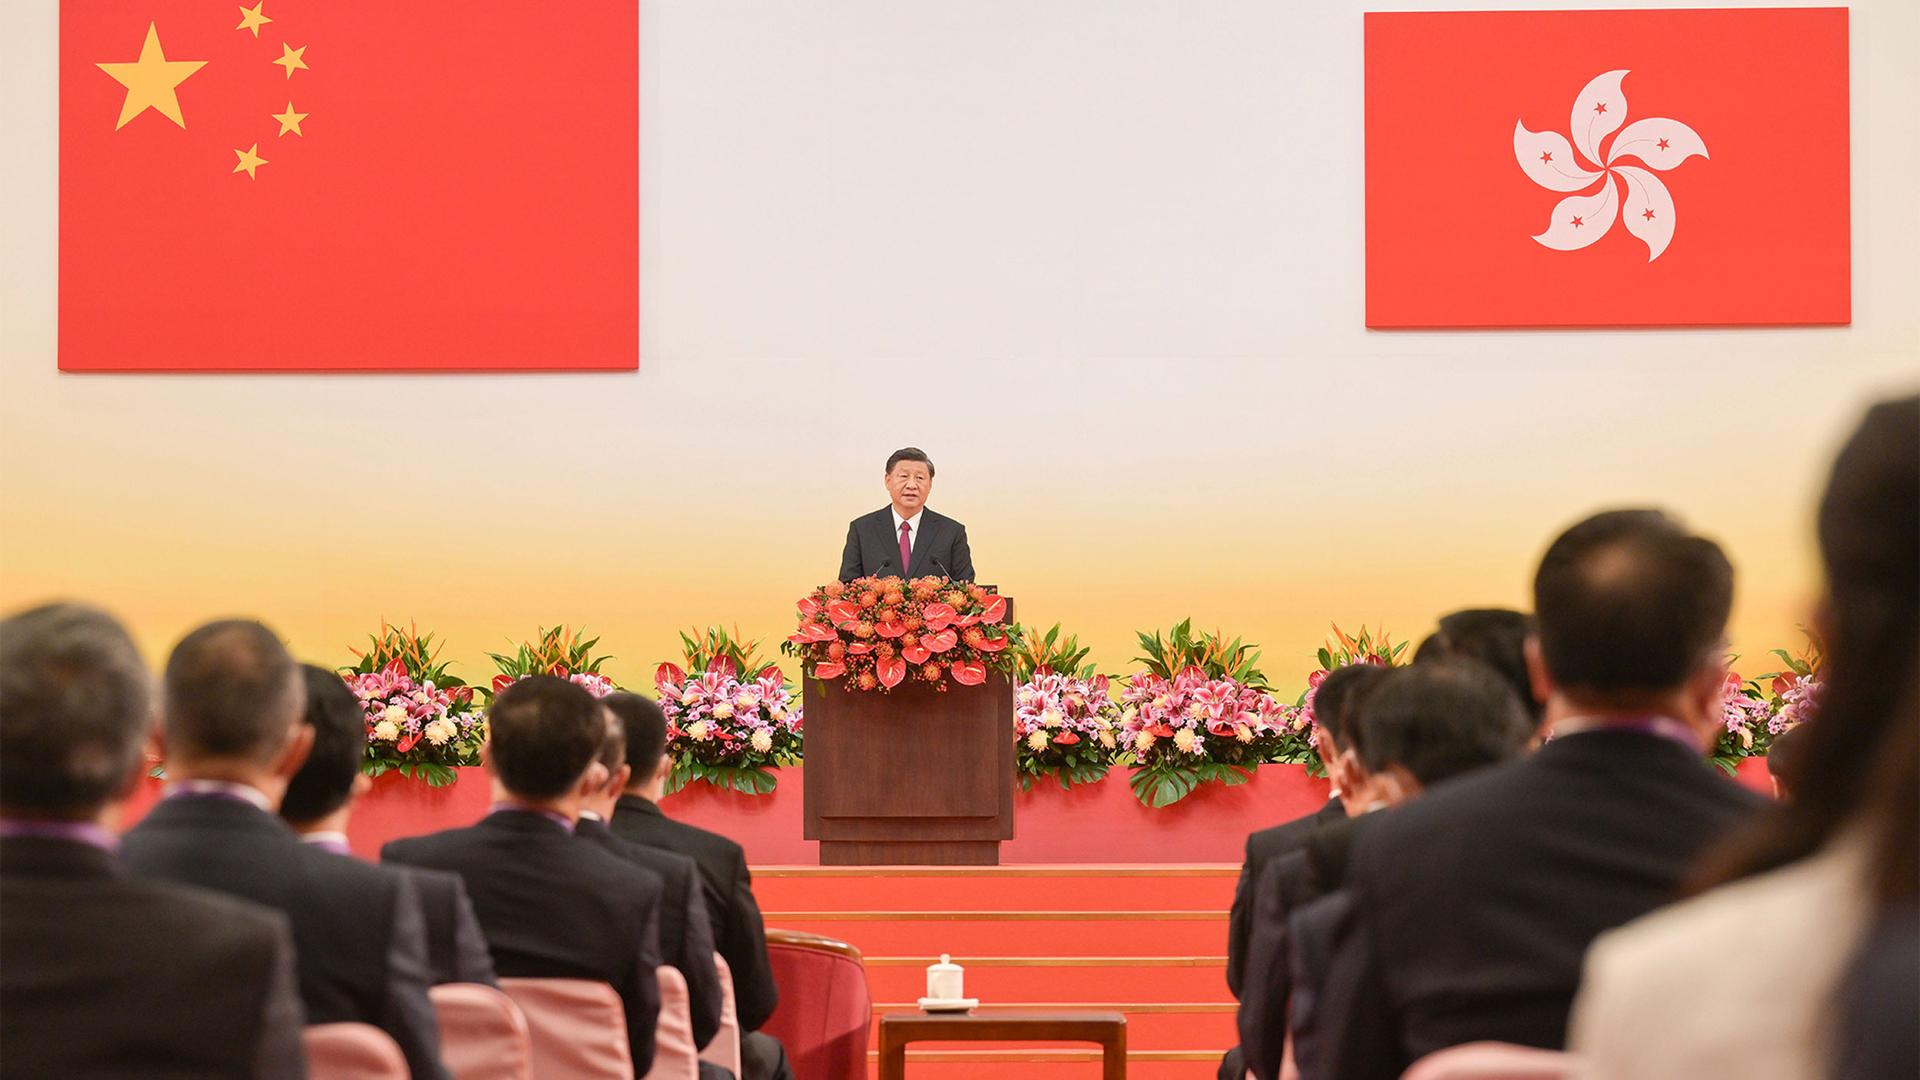 China's President Xi Jinping gives a speech following a swearing-in ceremony to inaugurate the city's new government in Hong Kong